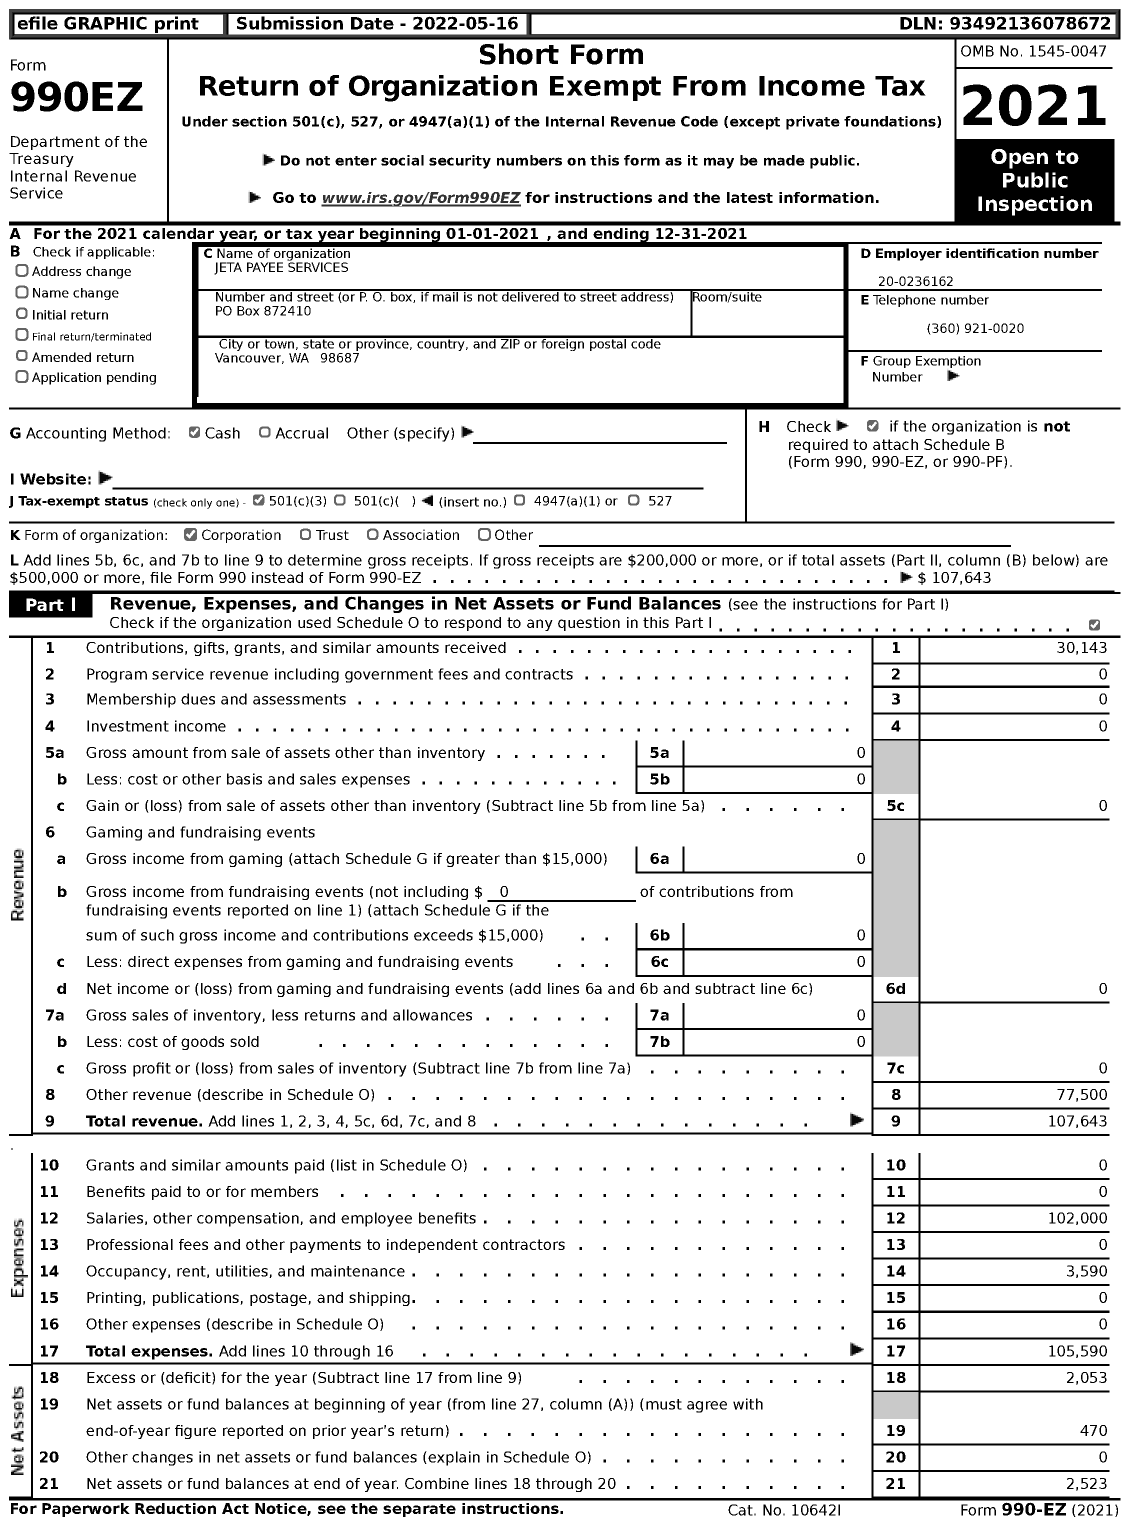 Image of first page of 2021 Form 990EZ for Jeta Payee Services